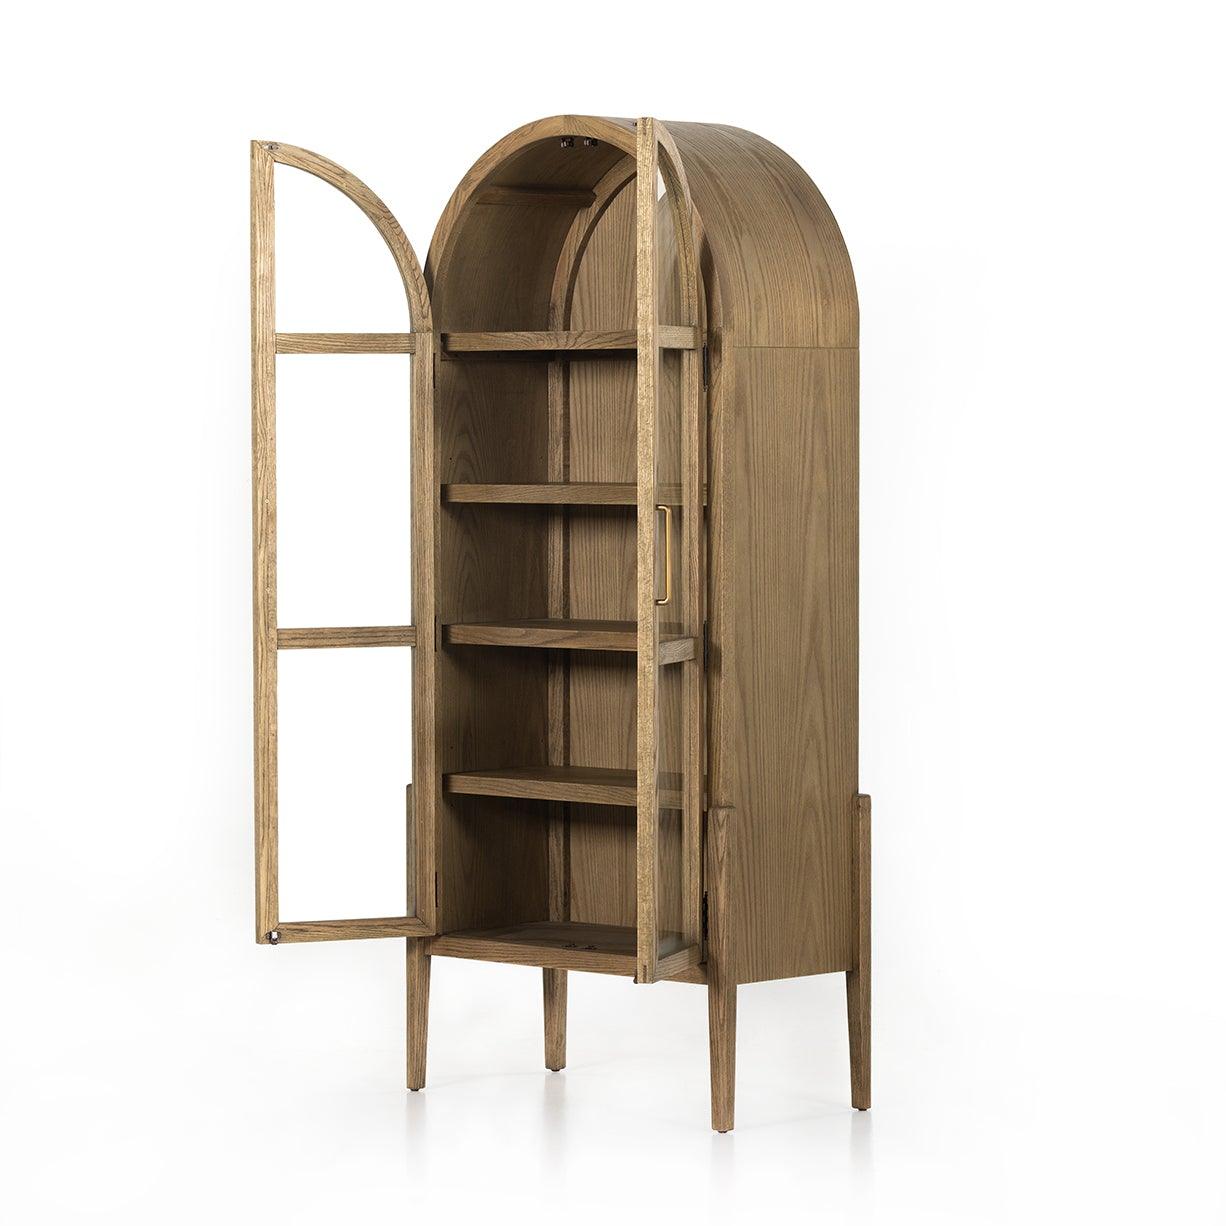 Tolle Drifted Oak Cabinet - Reimagine Designs - Bookcases, cabinet, new